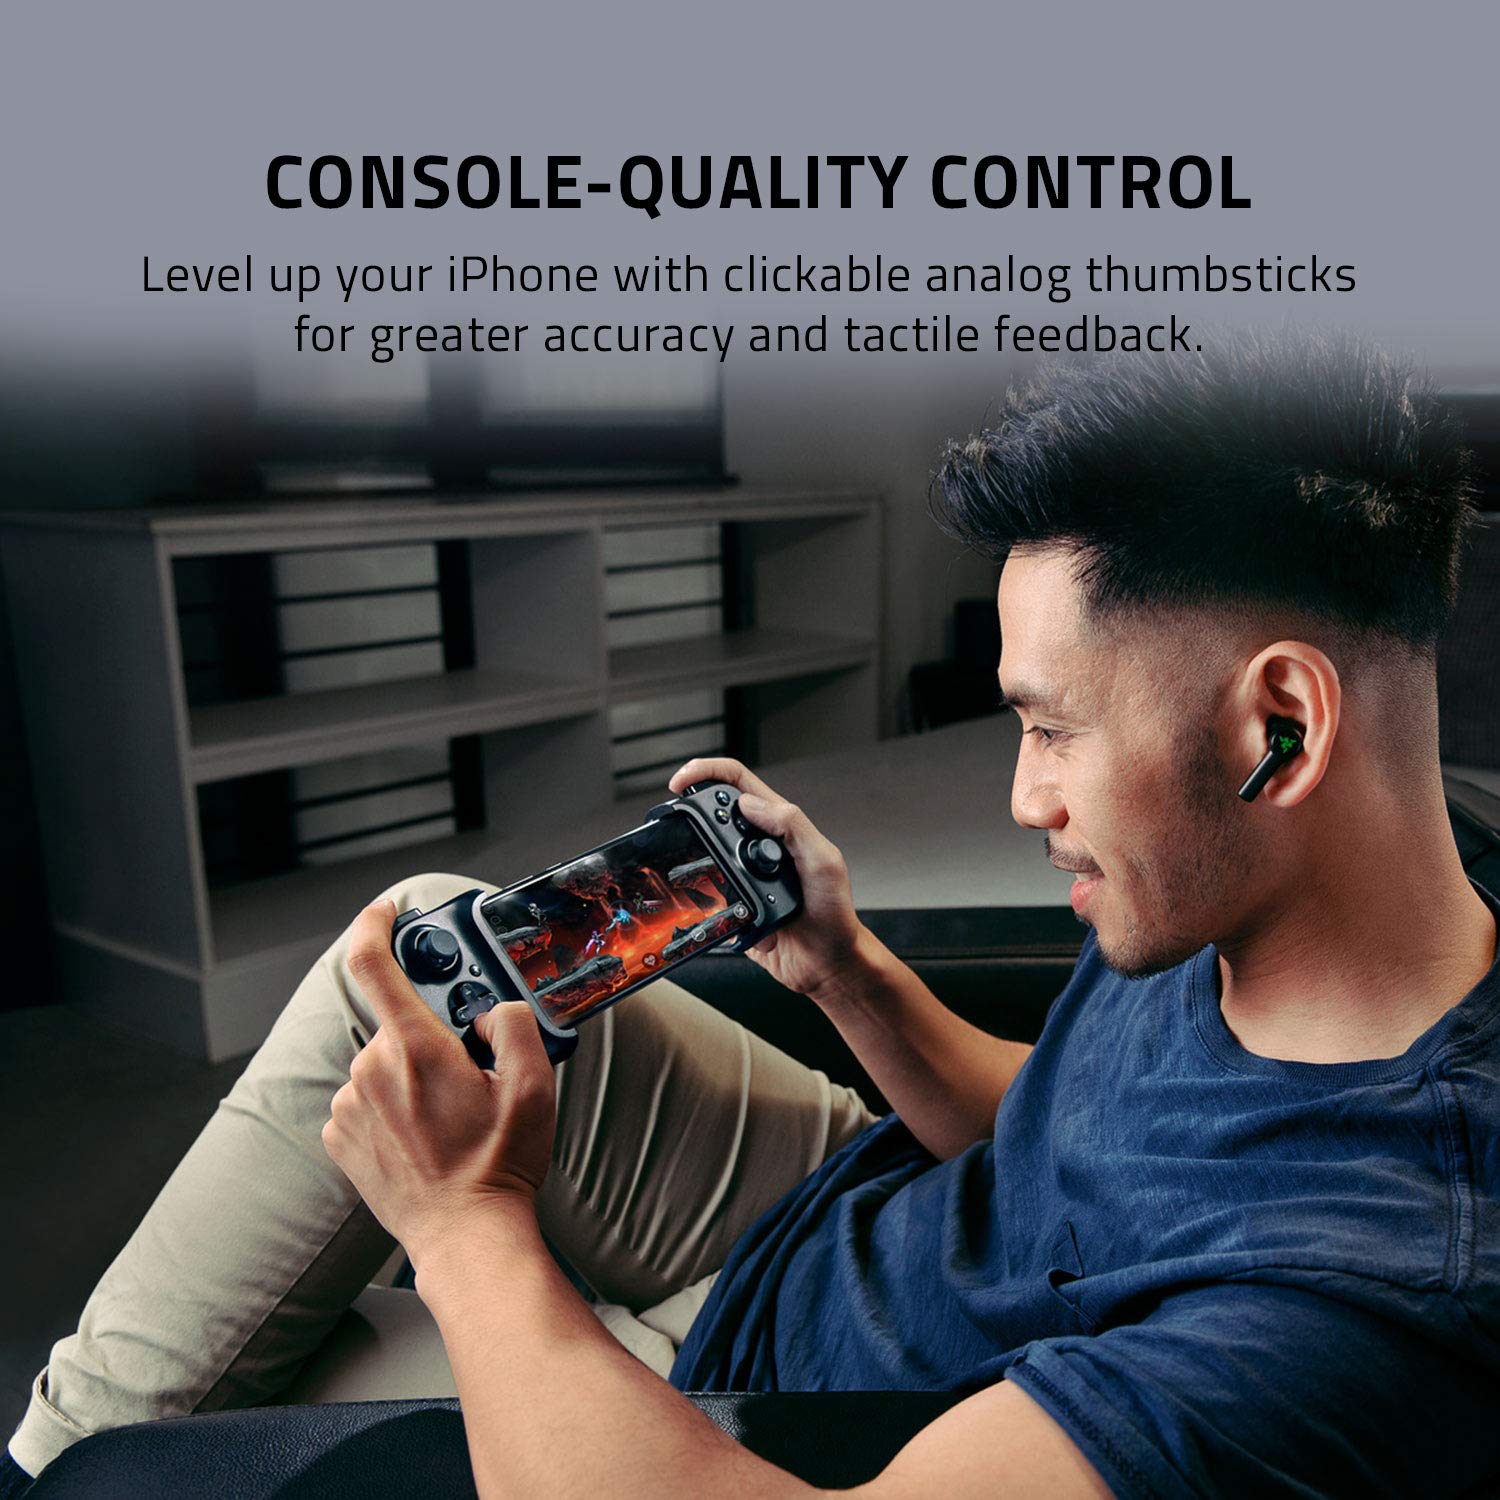 Razer Kishi Mobile Game Controller/Gamepad for iPhone iOS: Works with most iPhones – X, 11, 12, 13, 13 Max - Apple Arcade, Amazon Luna, Google Stadia - Lightning Port Passthrough - MFi Certified